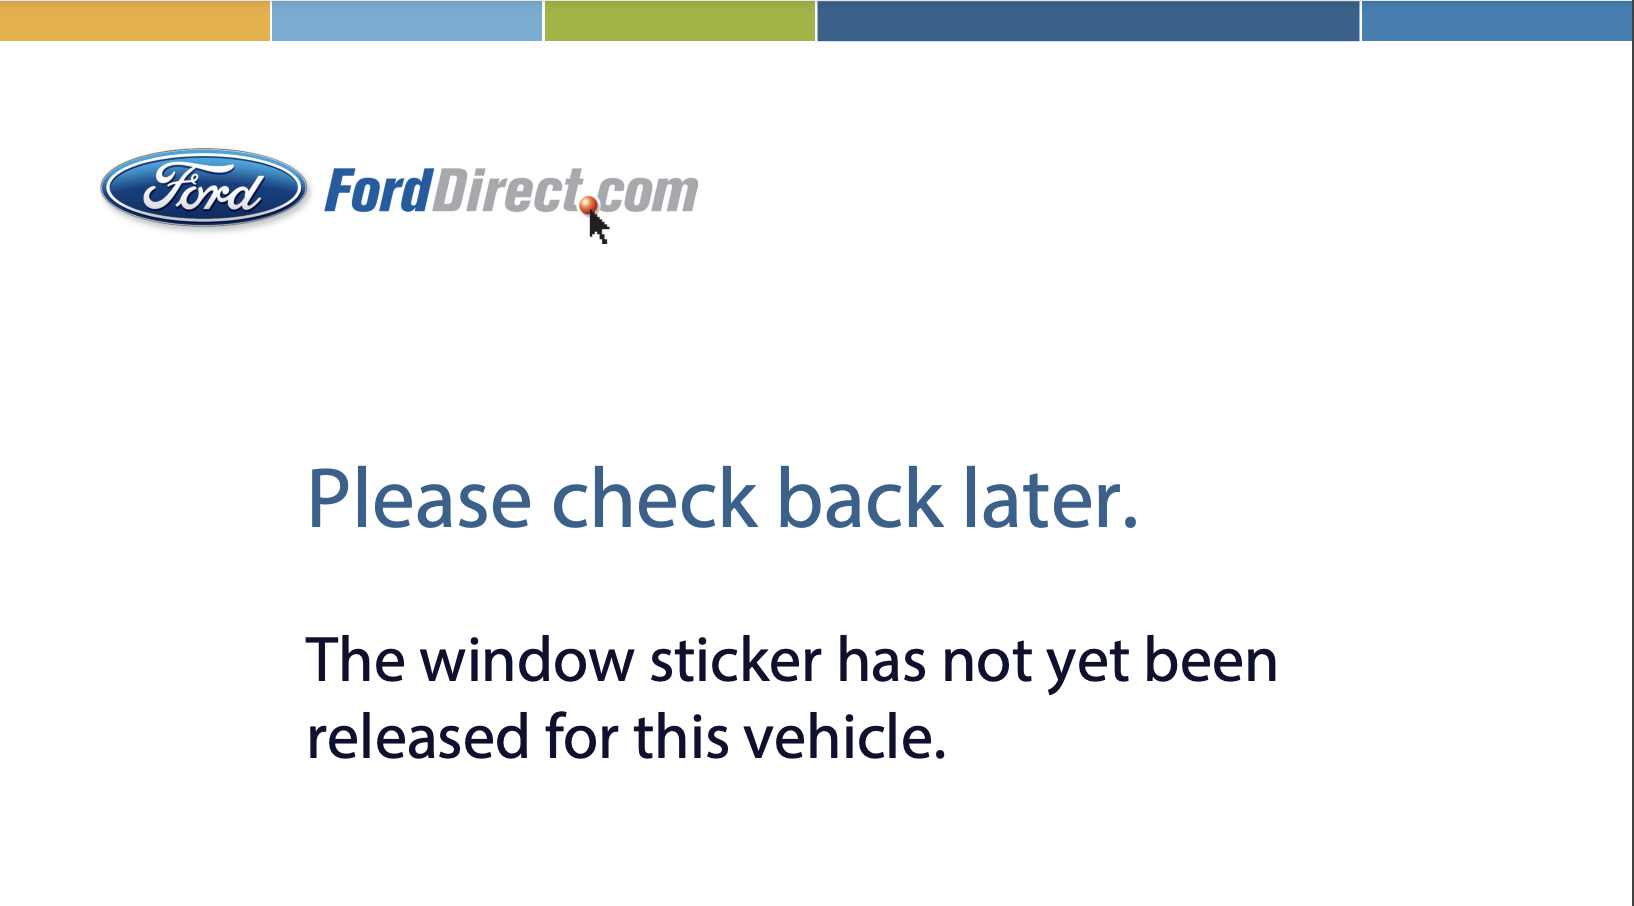 S650 Mustang Window Sticker getting Issued...? Screenshot 2023-07-25 at 2.49.33 PM